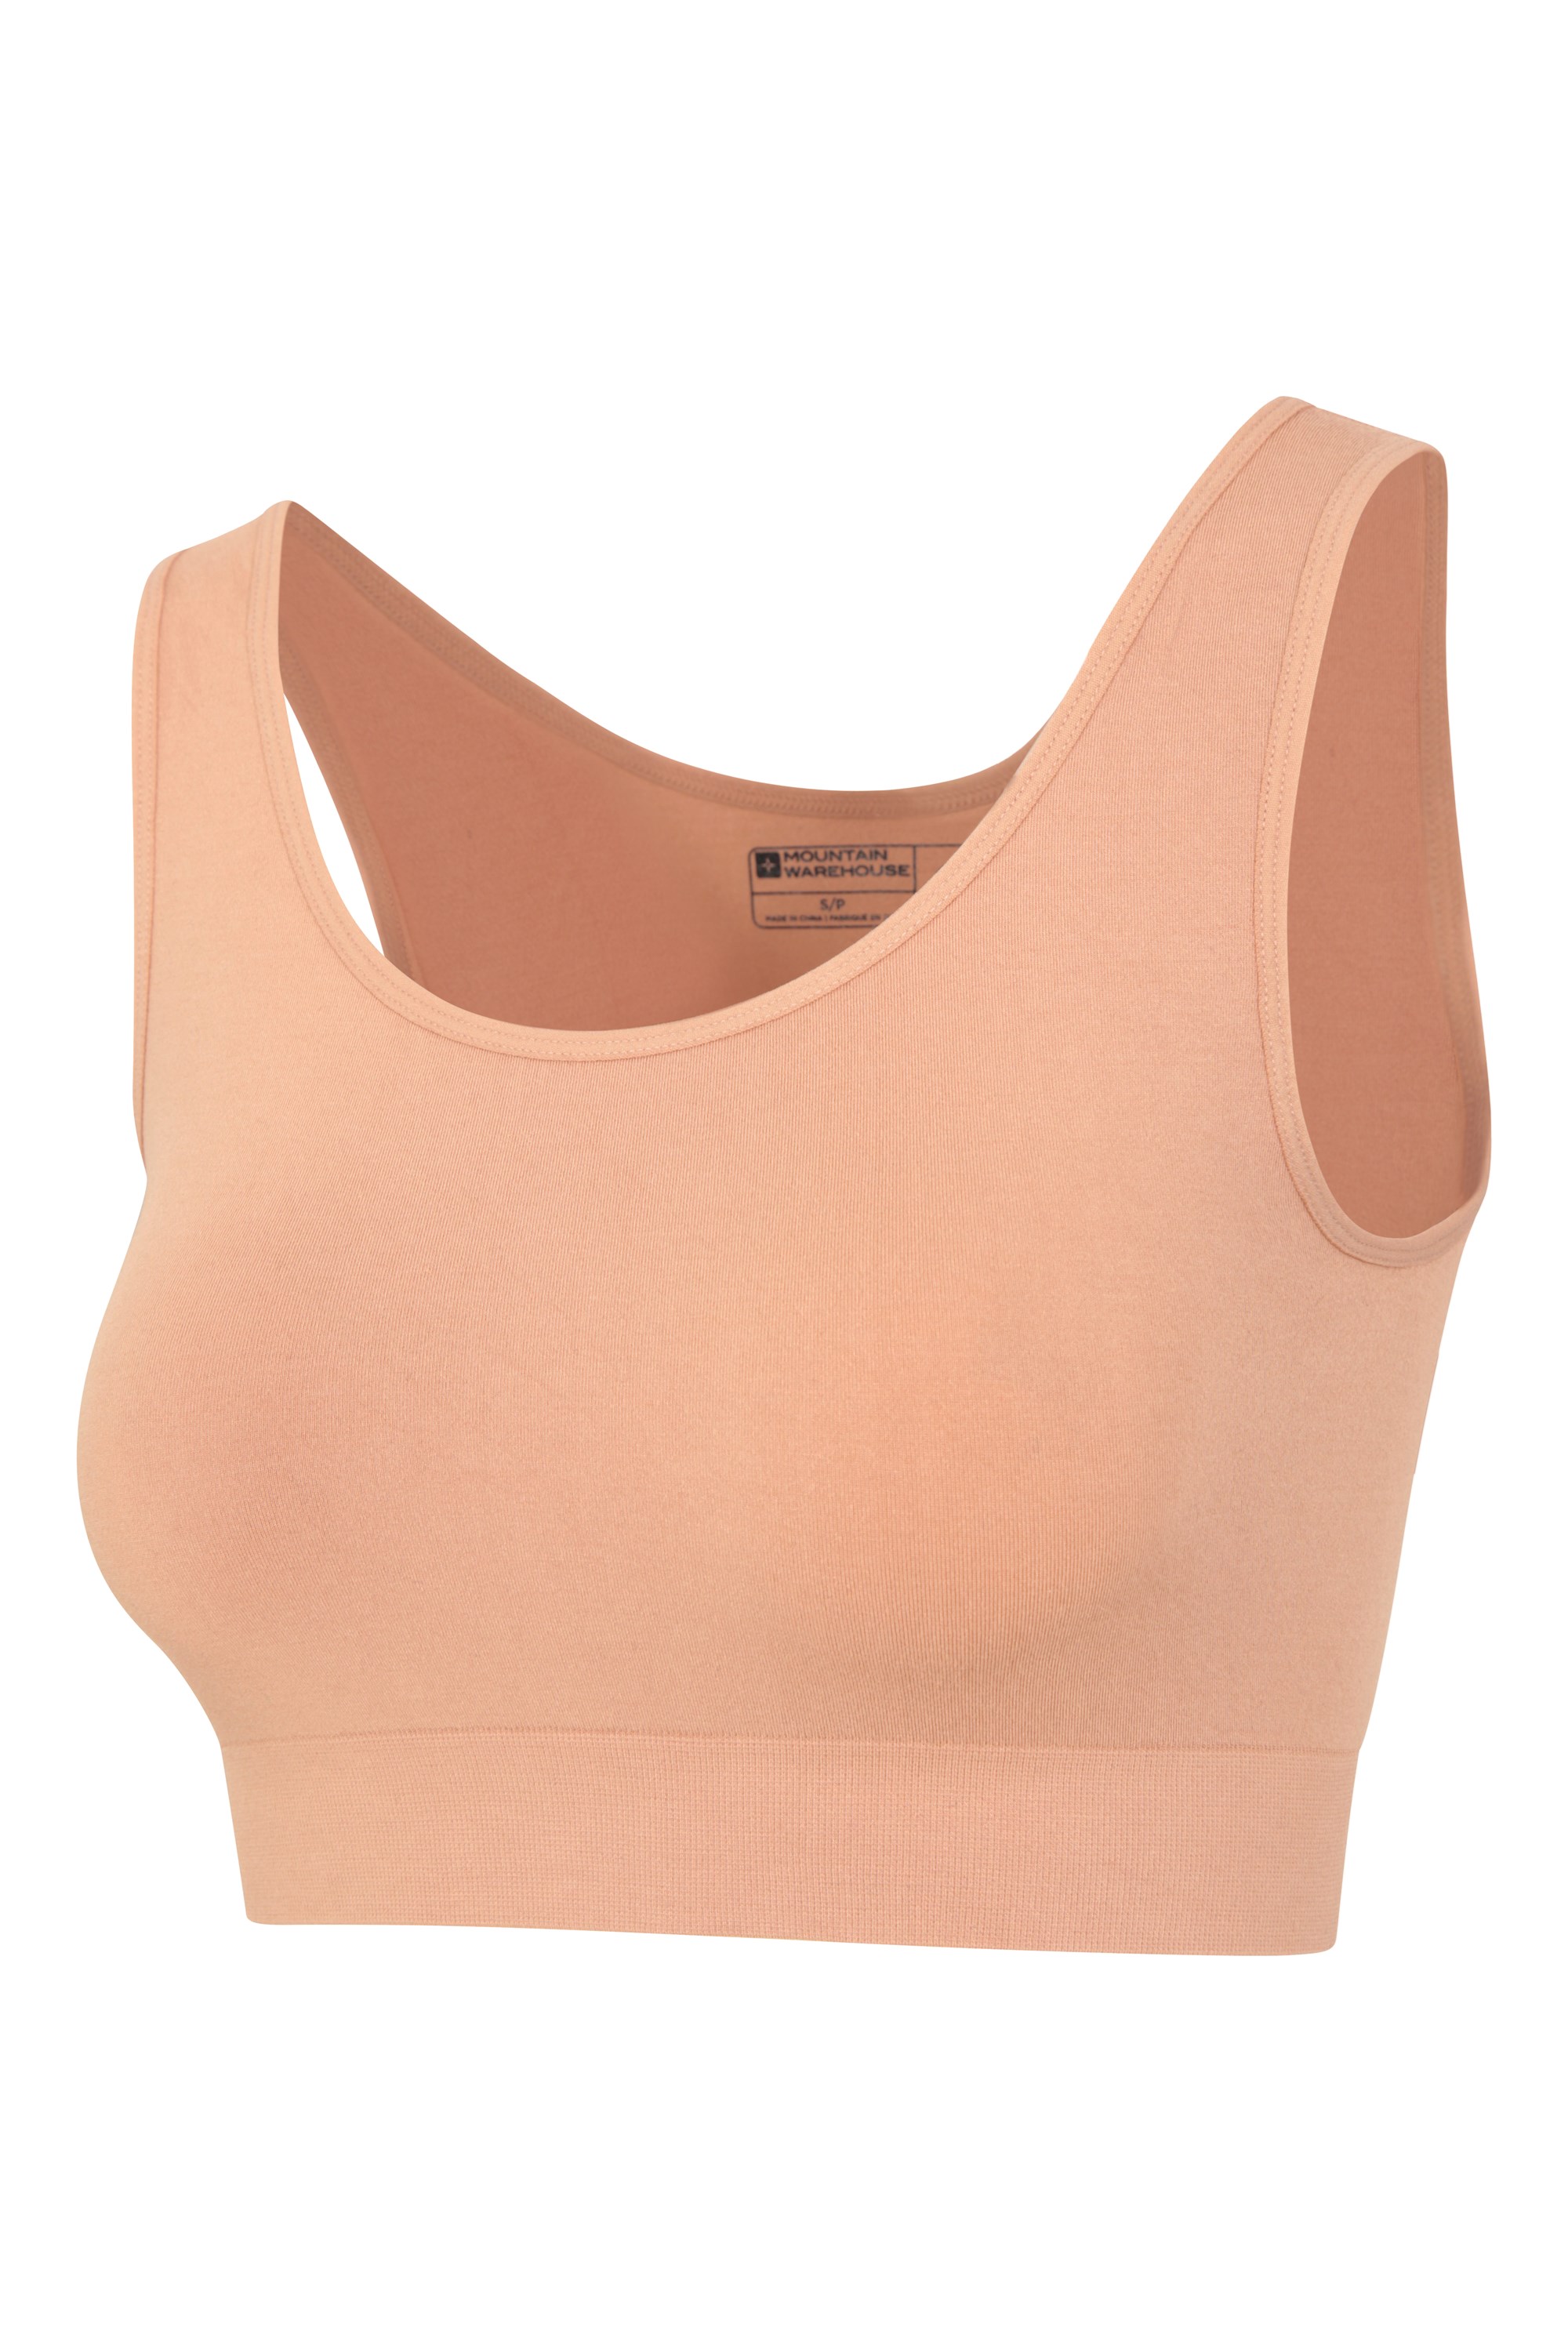 LUCACHI Soft Padded Tube Bra Seamless Crop Top Sexy Push Up Bra for  Removable Pad Women Full Coverage Lightly Padded Bra - Buy LUCACHI Soft  Padded Tube Bra Seamless Crop Top Sexy